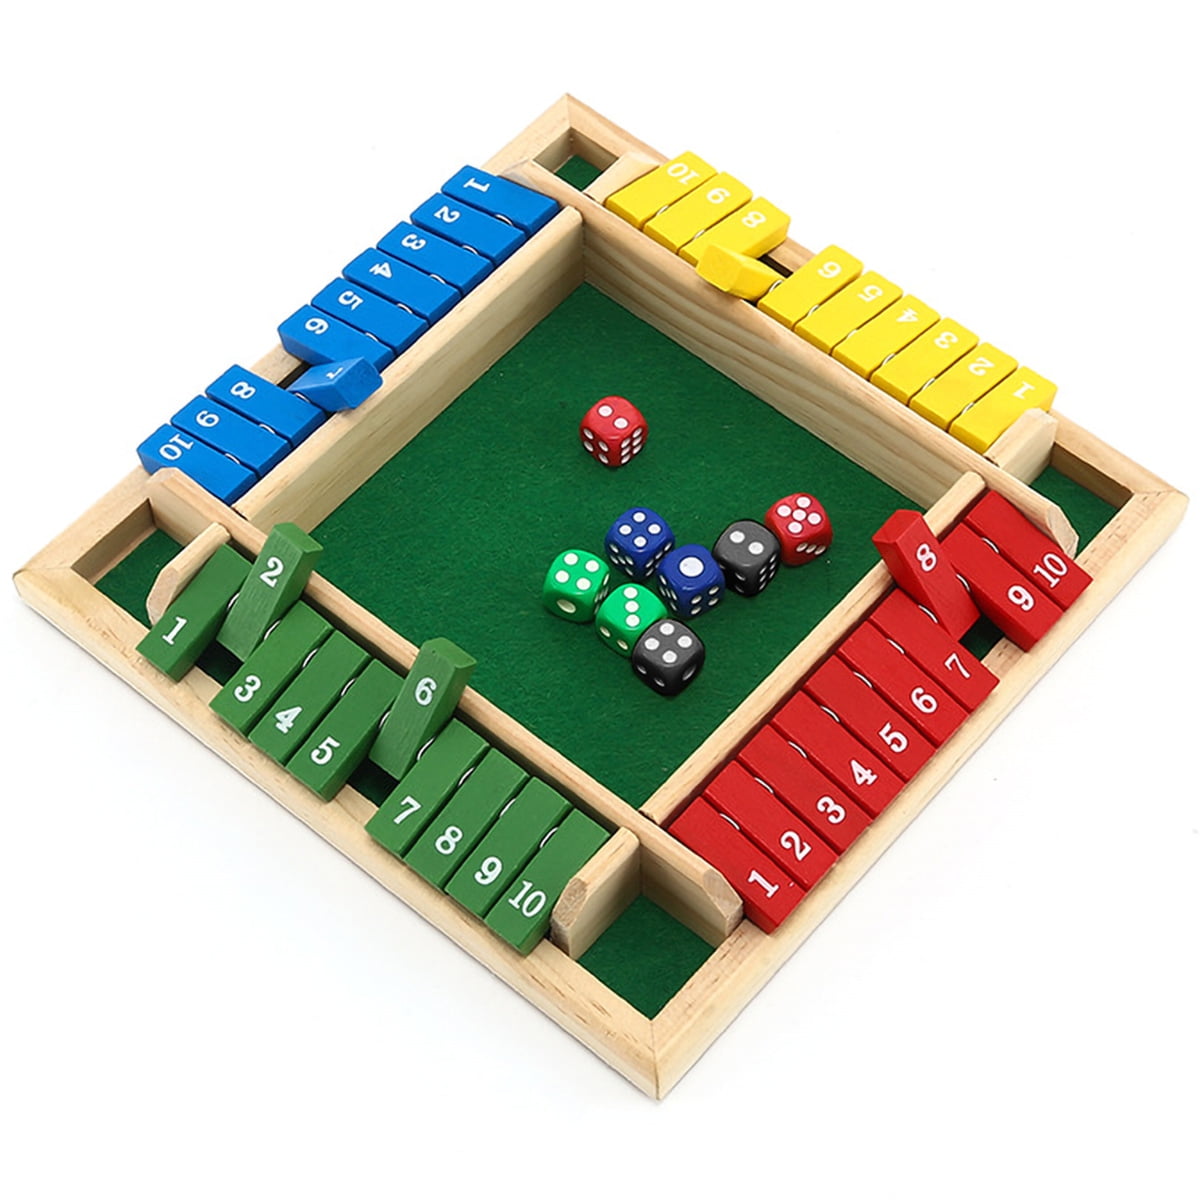 Nicecho Shut The Box Dice Game,2-4 Player Family Wooden Board Table Math Games for Adults and Kids 8 Dices Classics Tabletop Version Games for Classroom,Home,Party or Pub 